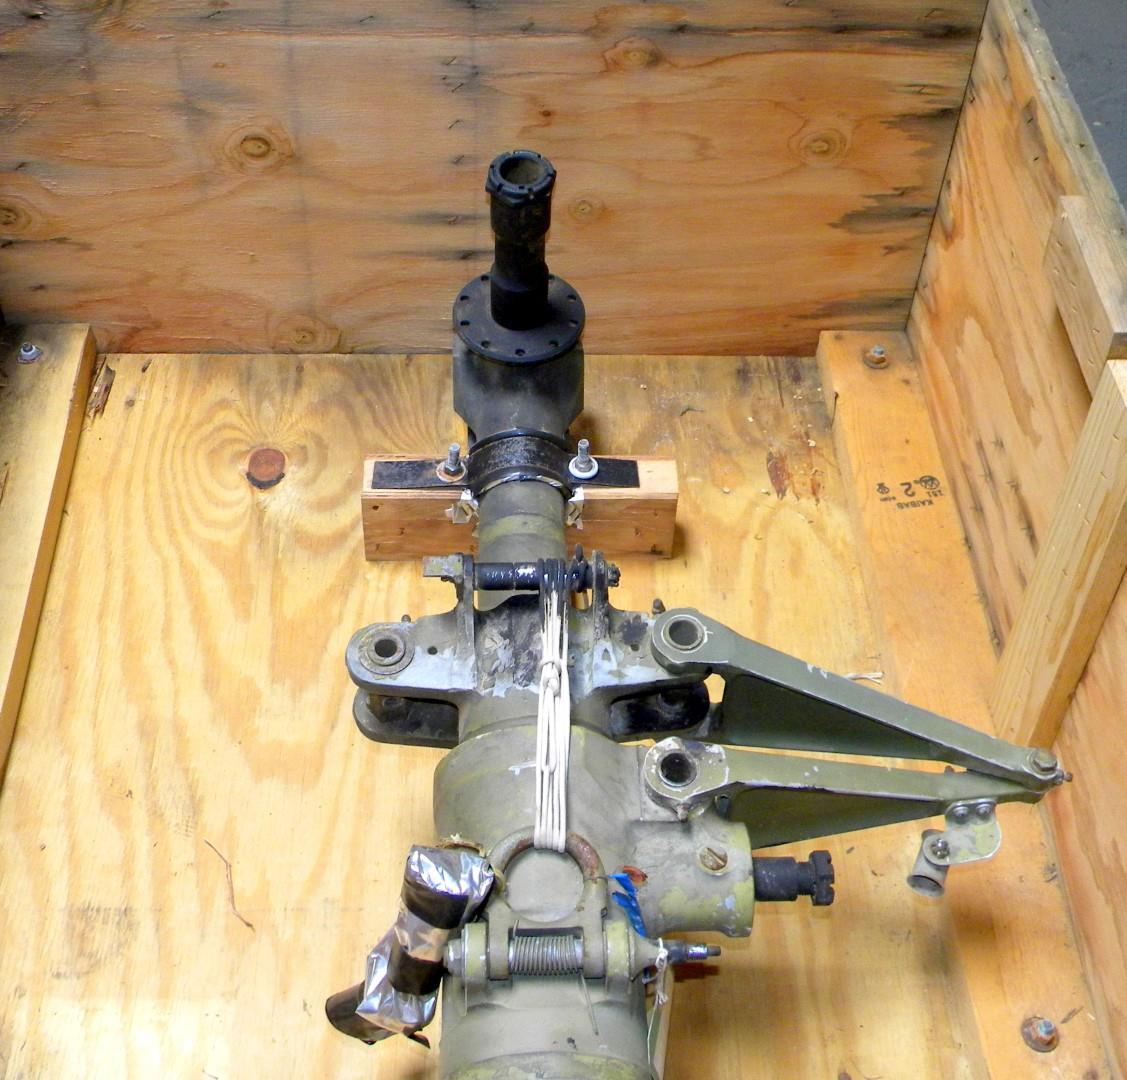 SP-1777 | 1620-00-883-1667 Helicopter Retractable Landing Gear USED (9).JPG